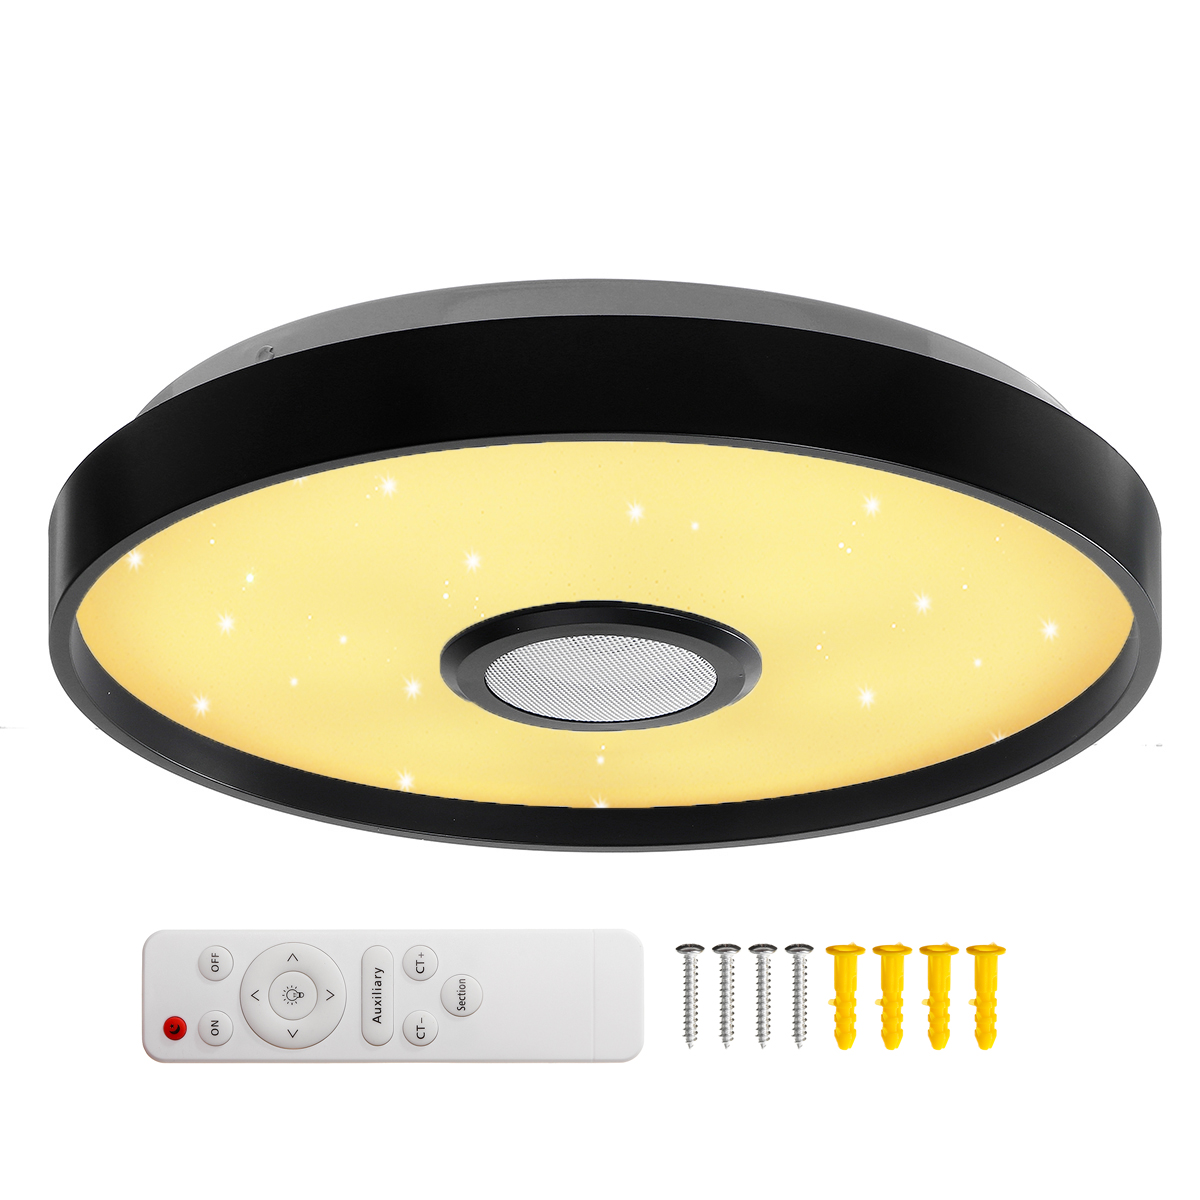 Dimmable-36W-RGB-LED-Ceiling-Light-Lamp-bluetooth-WIFI-Alexa--Google-Home--Remote-1758787-7